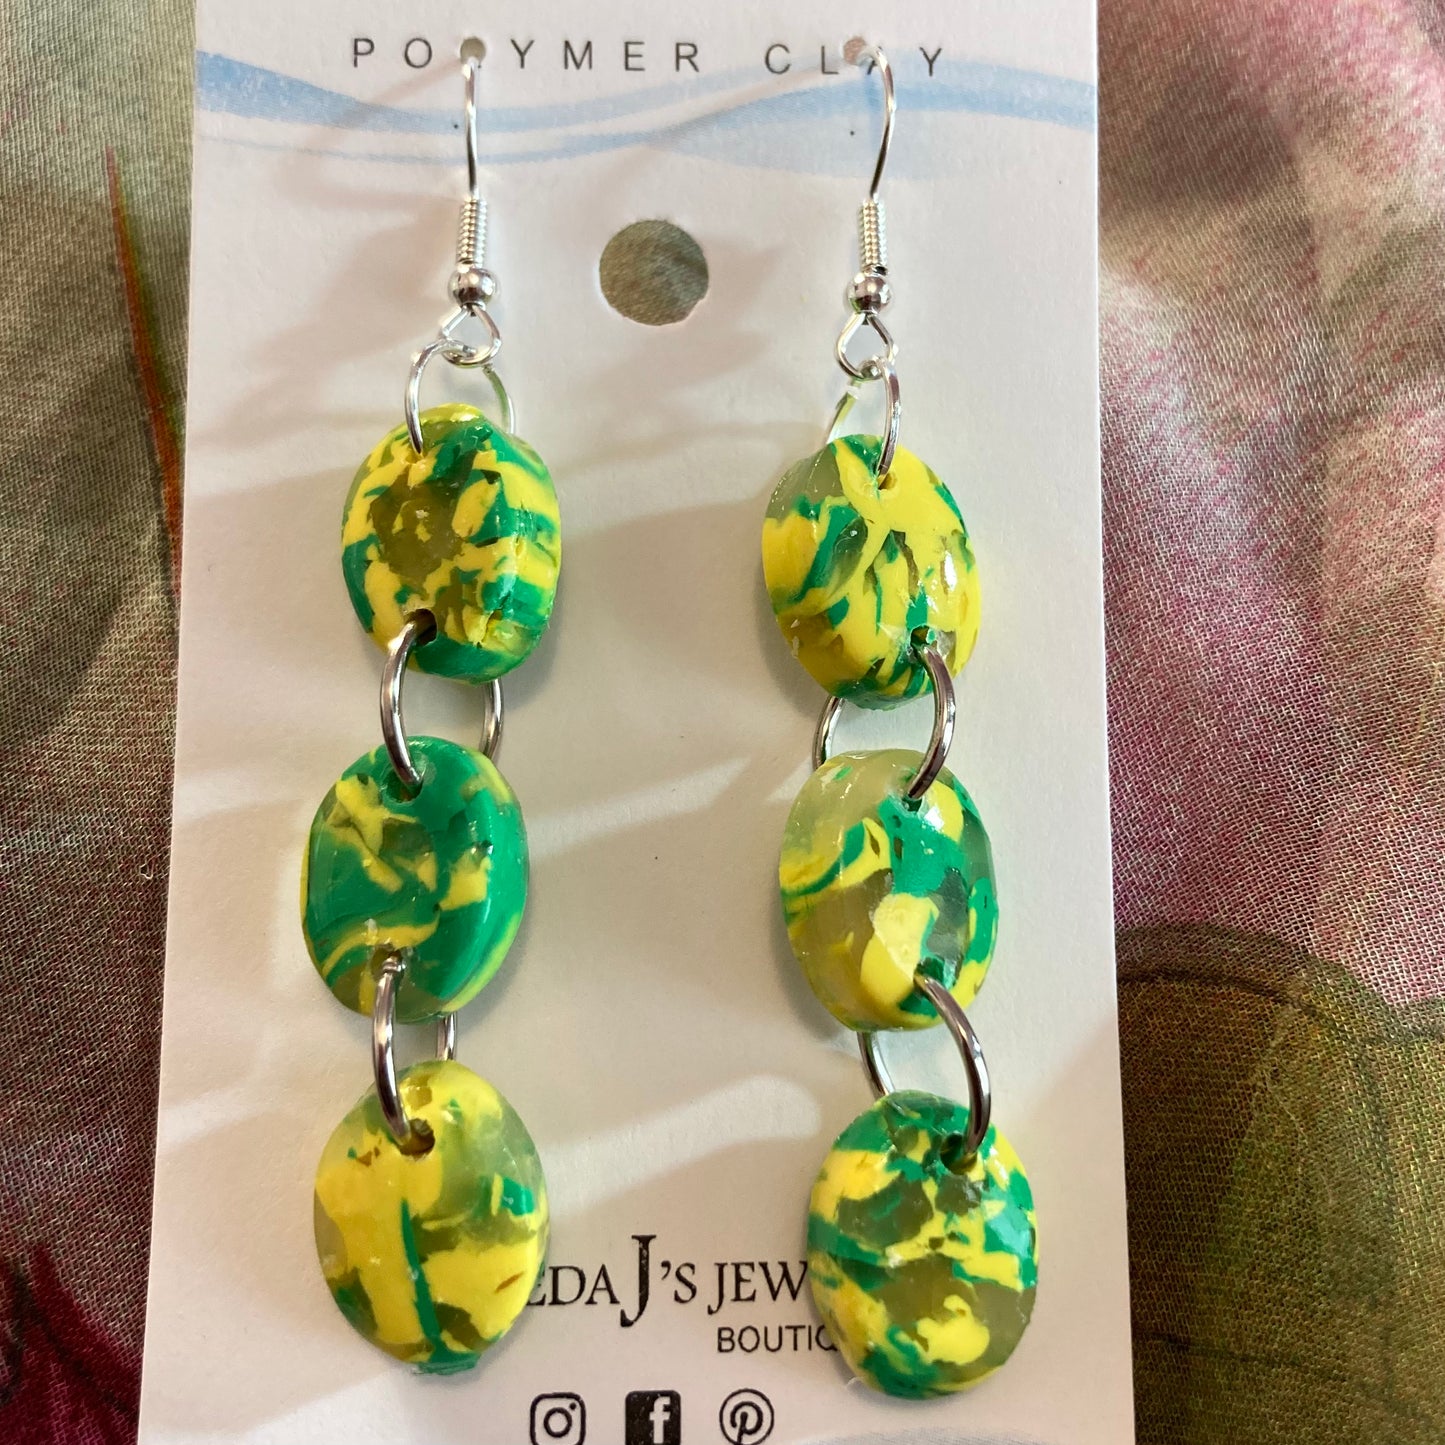 PLYCL-09 - 3-Tier Green & Yellow Translucent Marbled Earrings